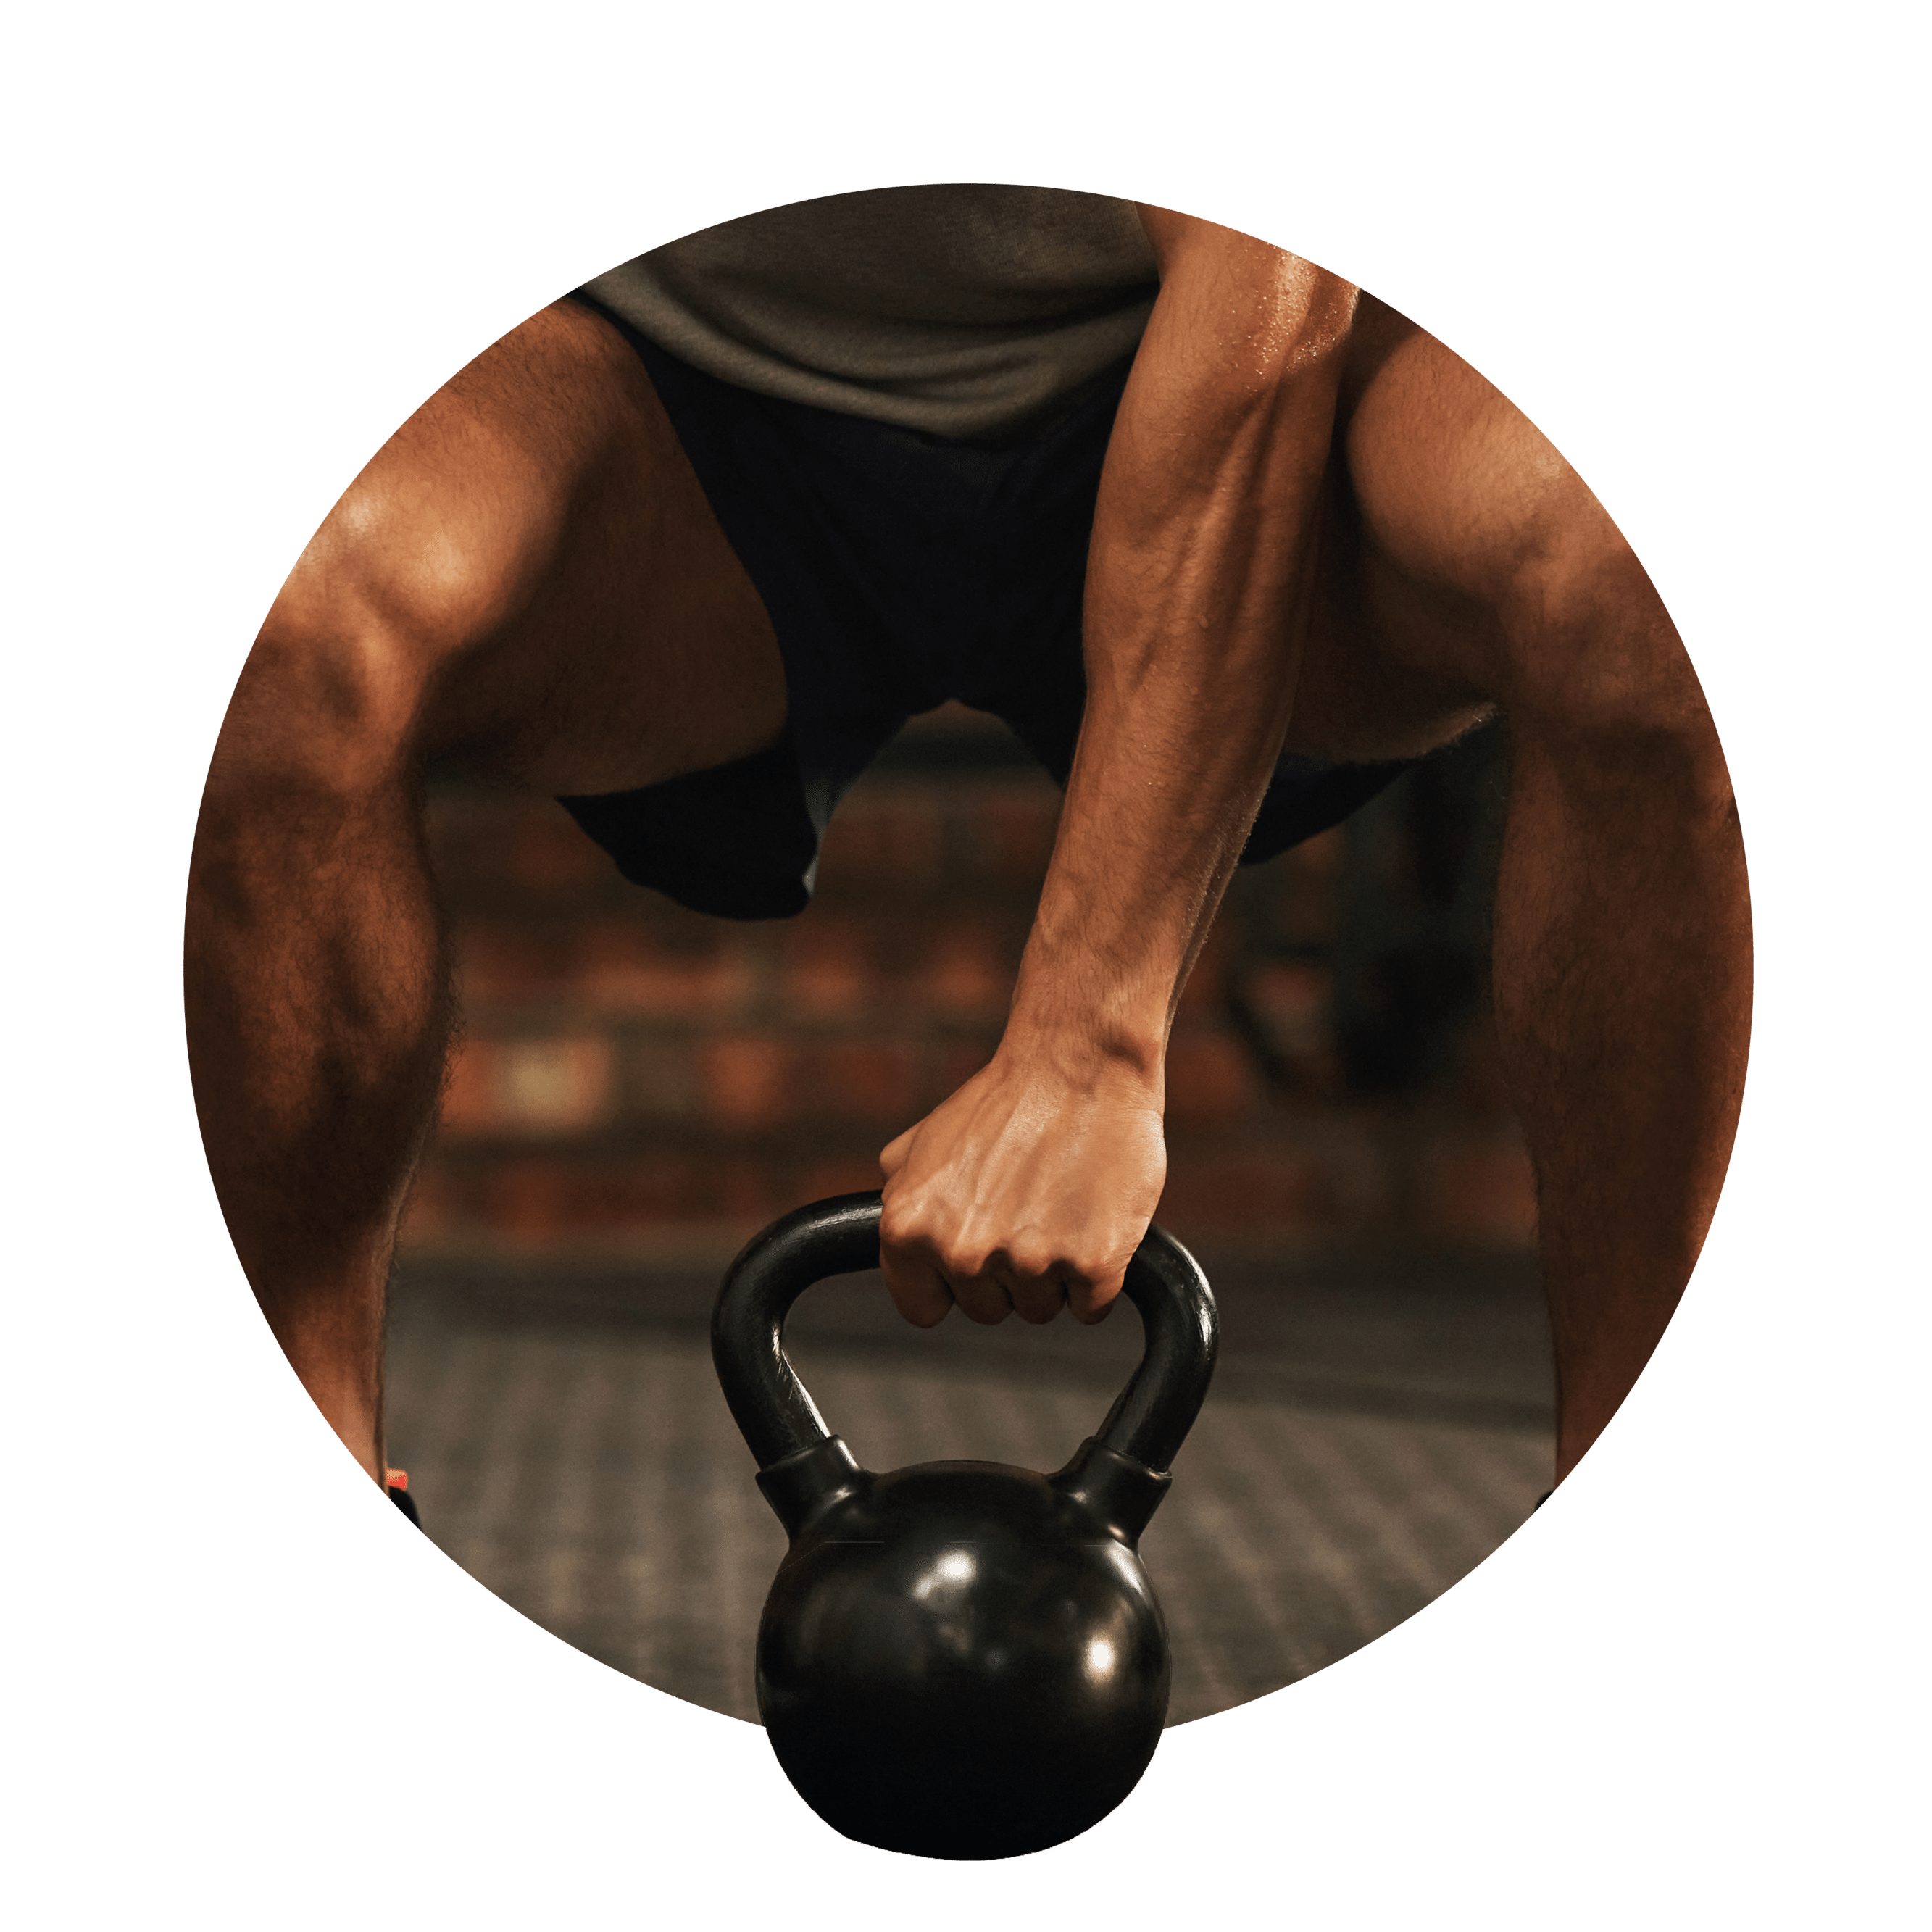 Weightlifting with kettlebell in squat position.